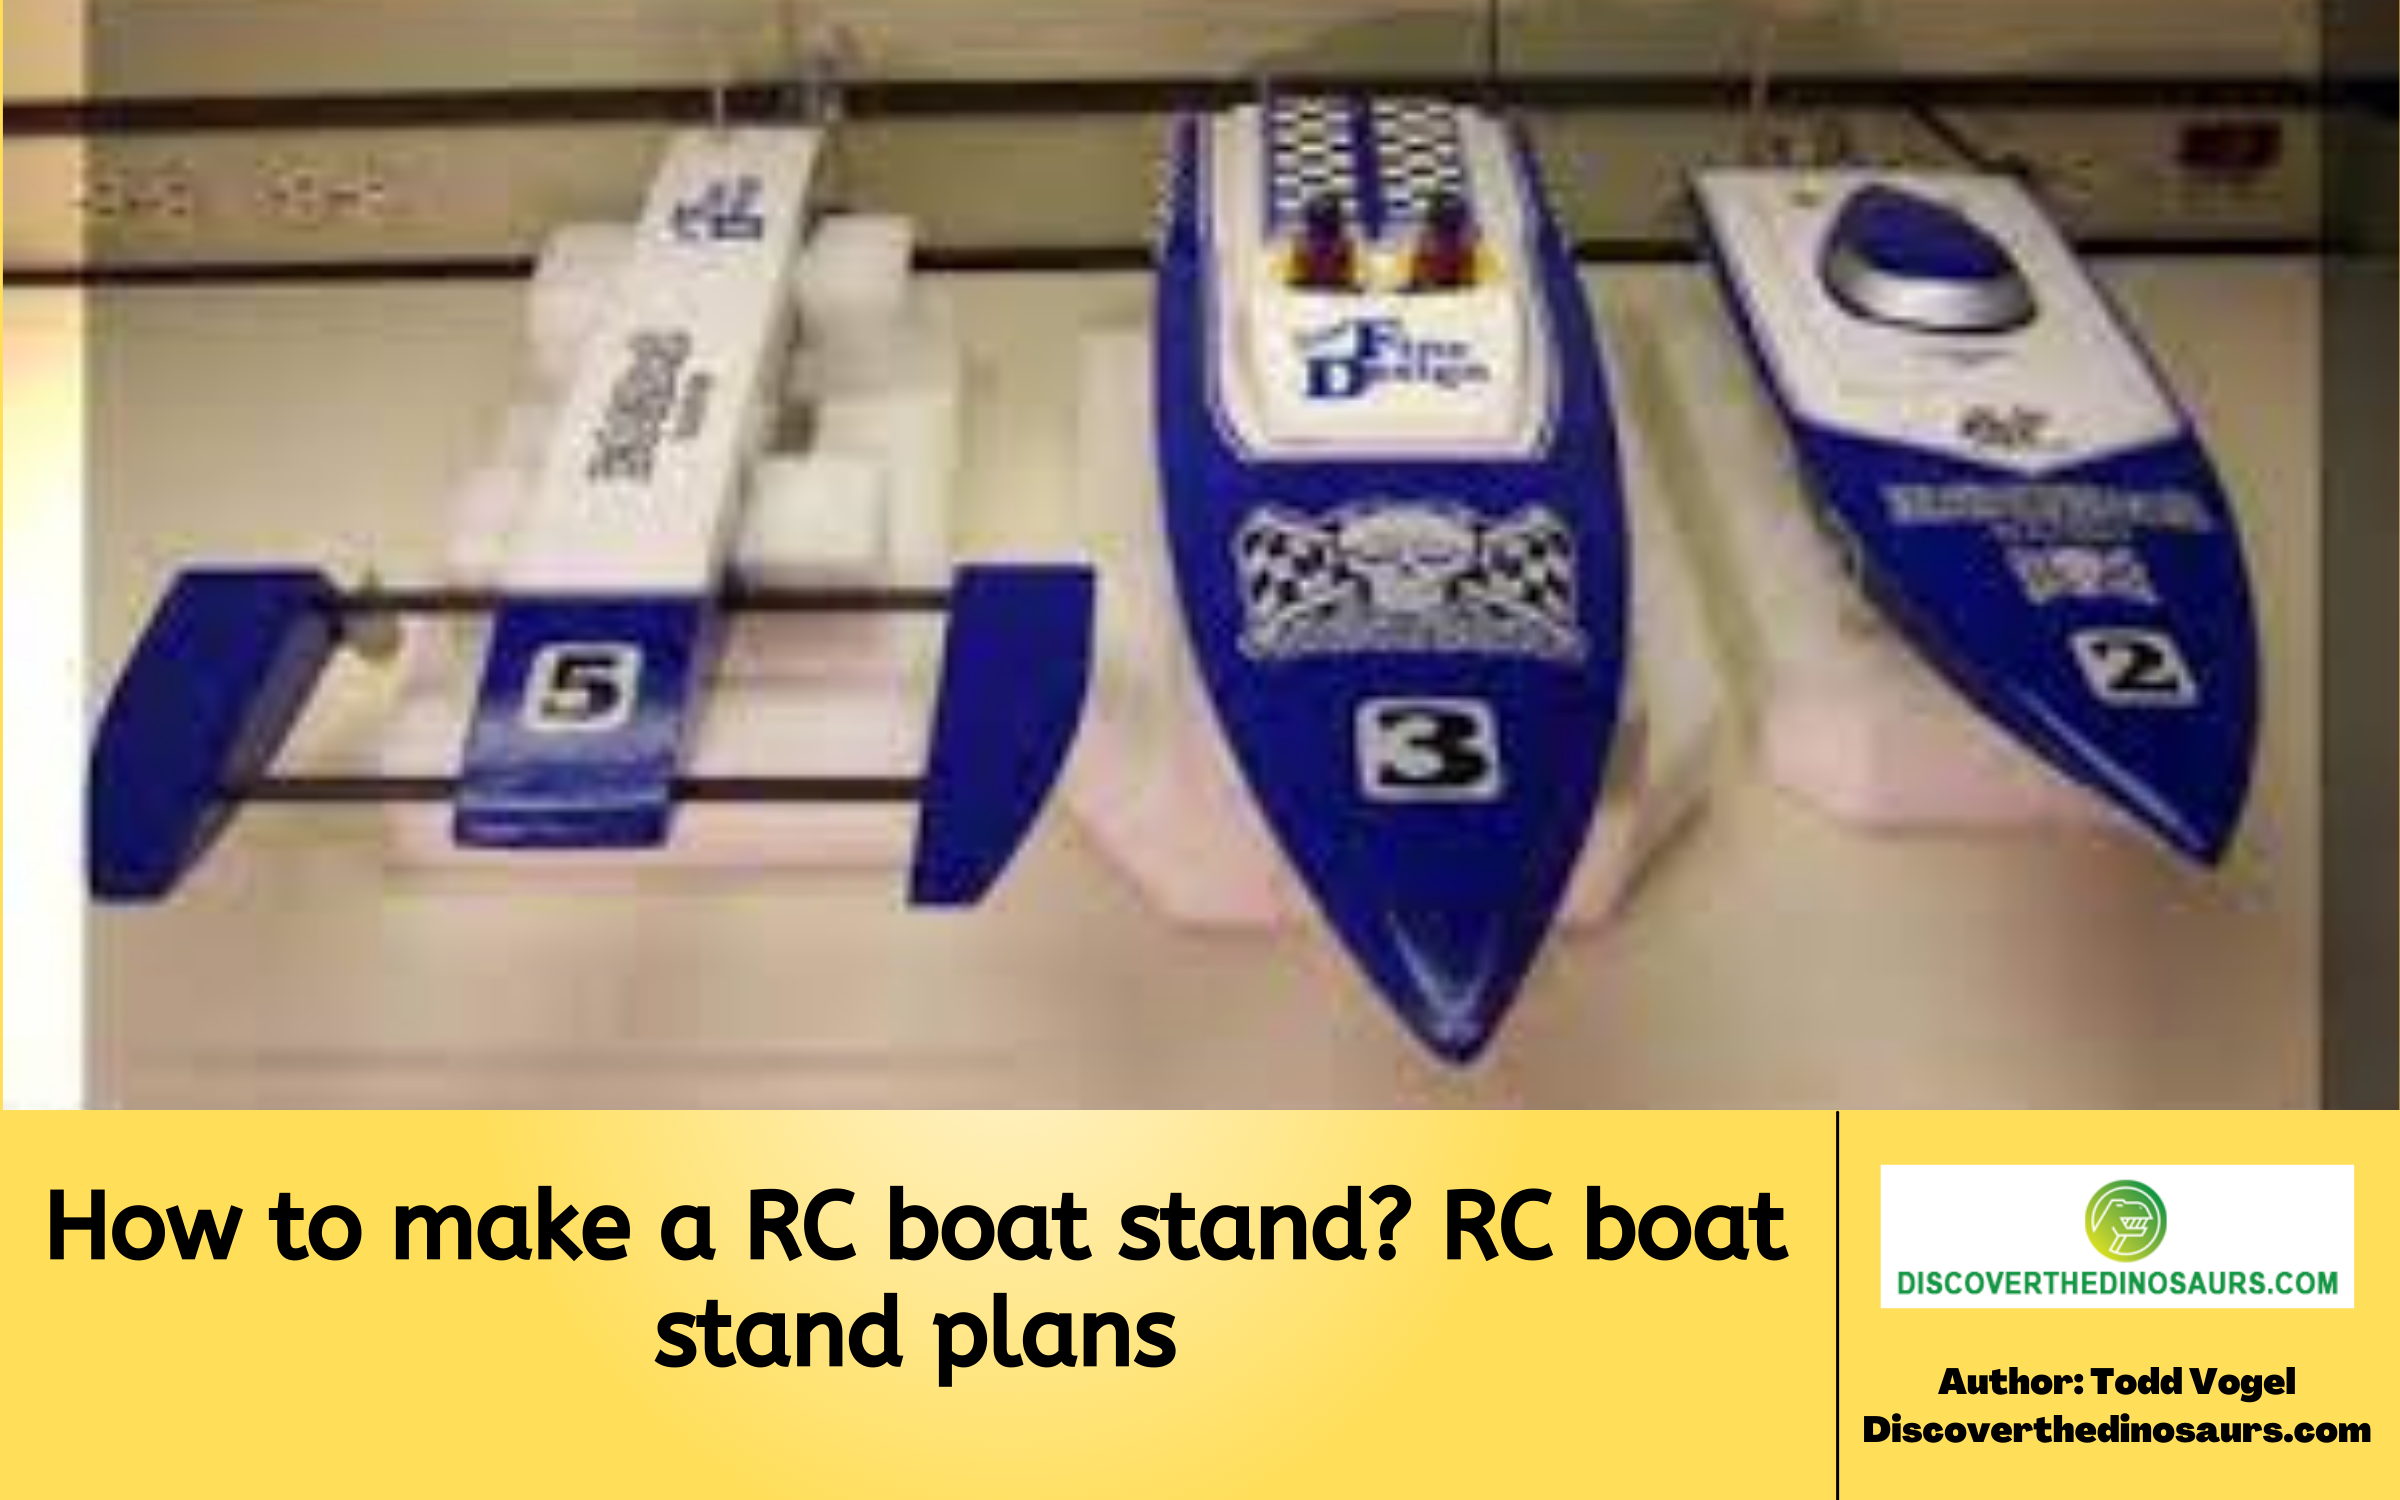 How to make a RC boat stand? RC boat stand plans